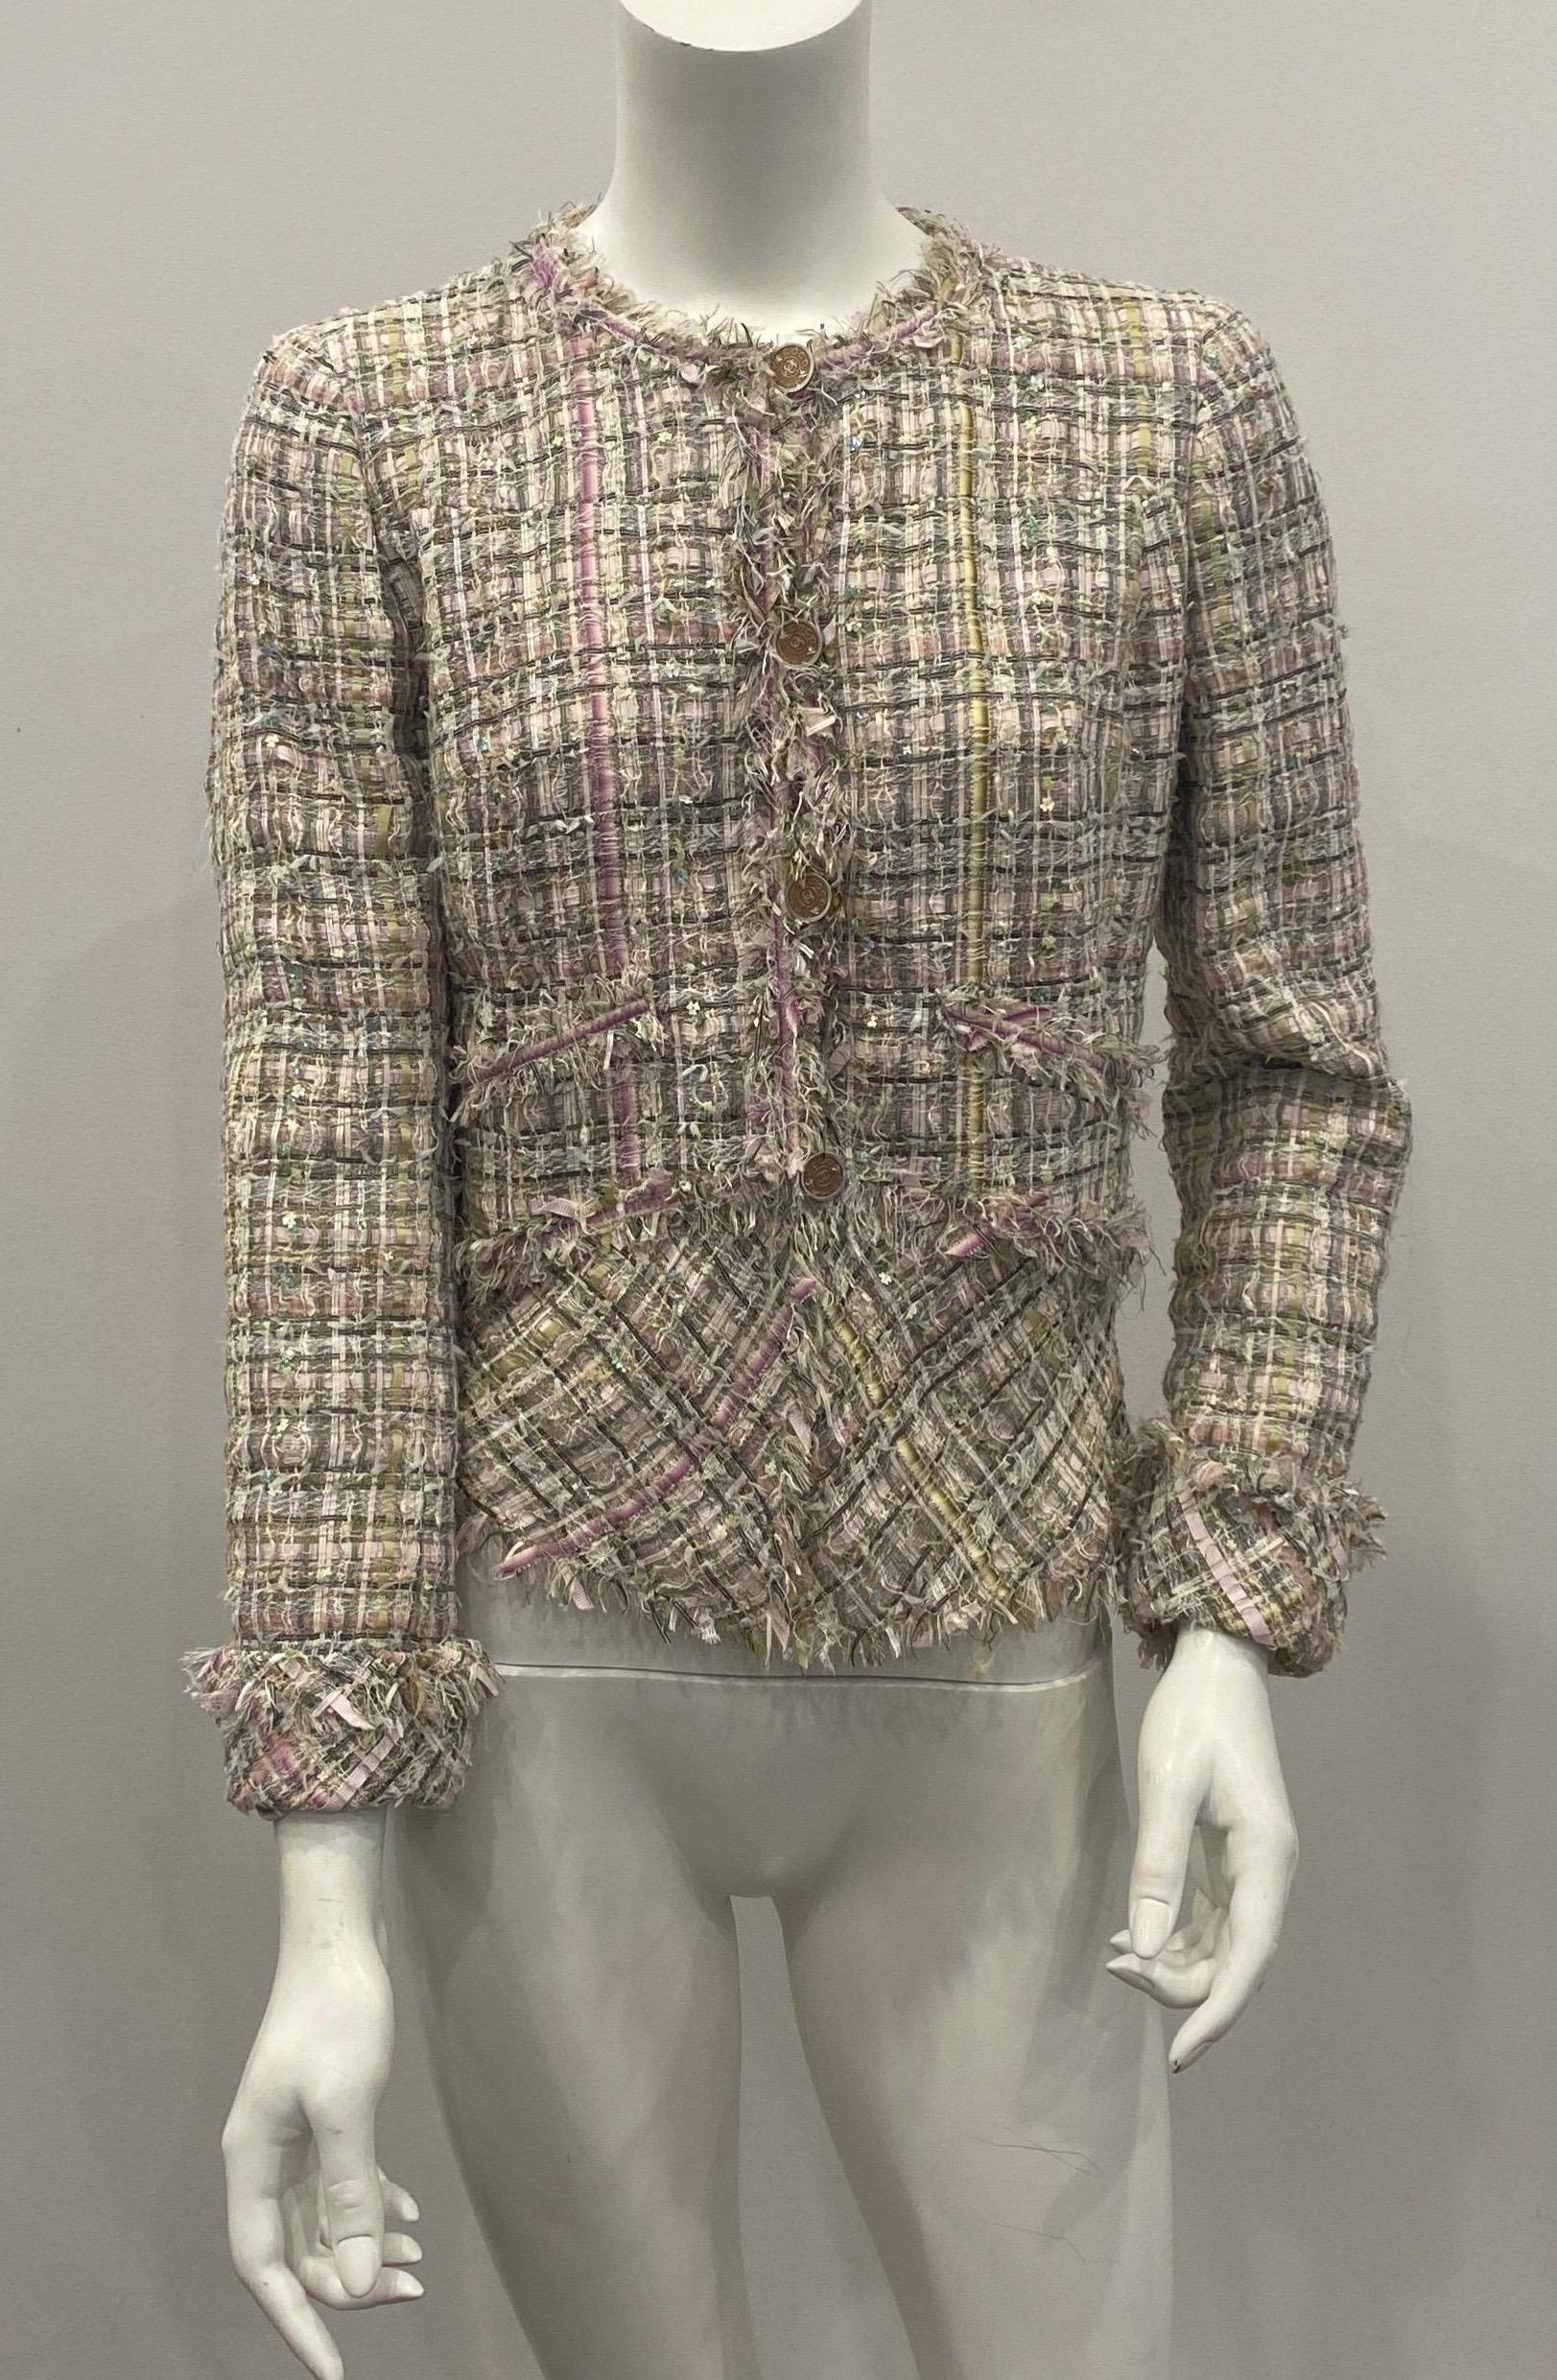 Chanel Multi Pastels Ribbon Boucle Jacket -Size 40 From the Spring 2005P collection. This jacket has multi pastel colored ribbons of different sizes woven throughout the jacket with tiny pastel sequins to give it such a special touch. The jacket is